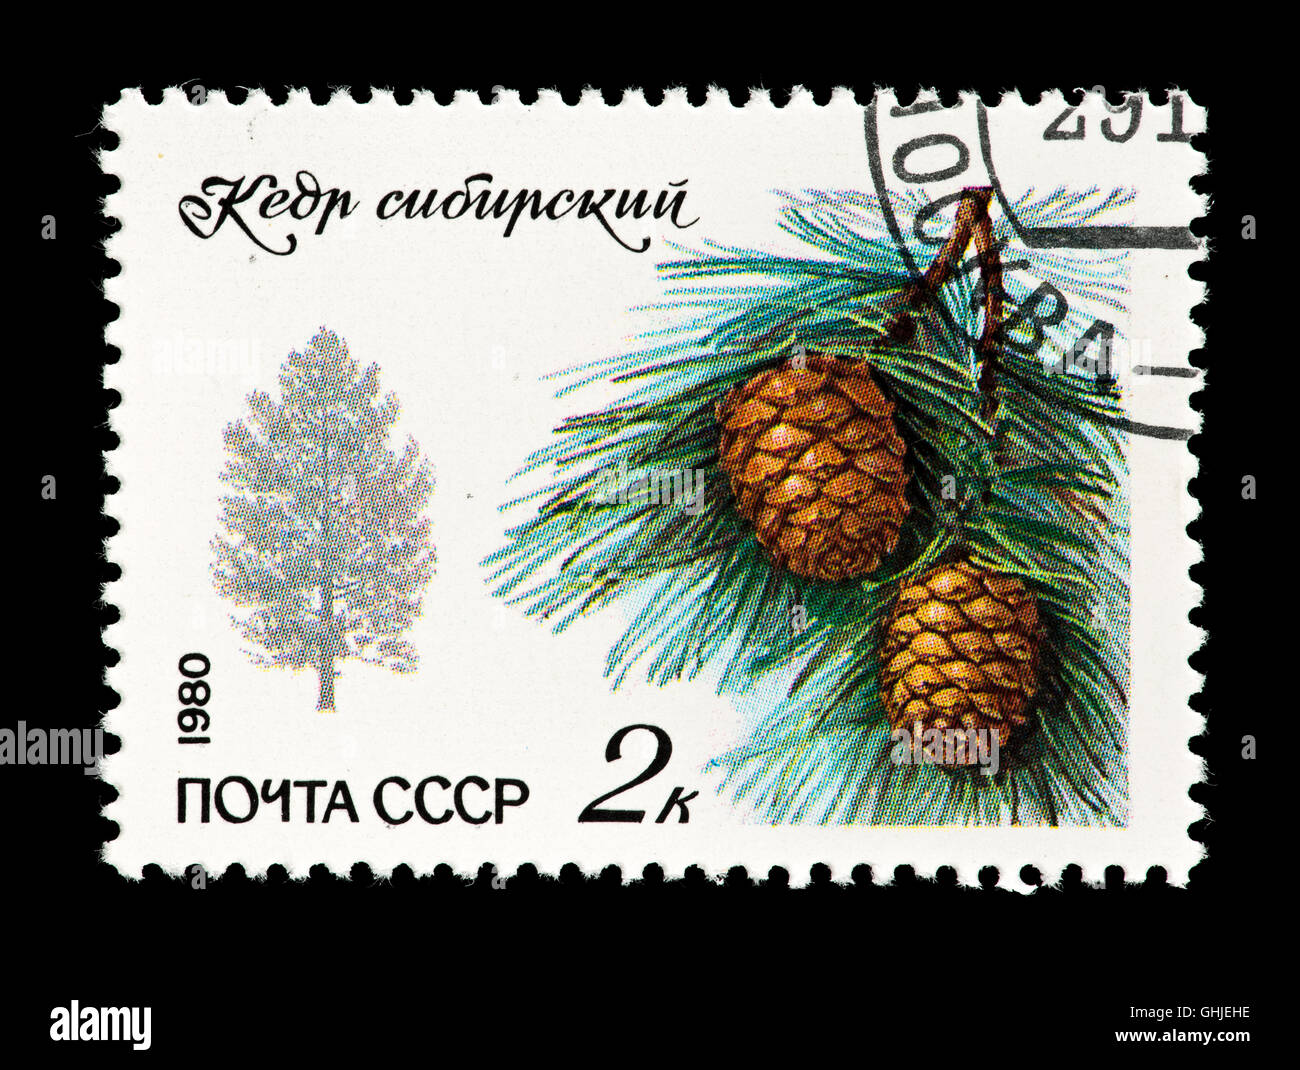 Postage stamp from the Soviet Union depicting Siberian pine, needles and cones. Stock Photo